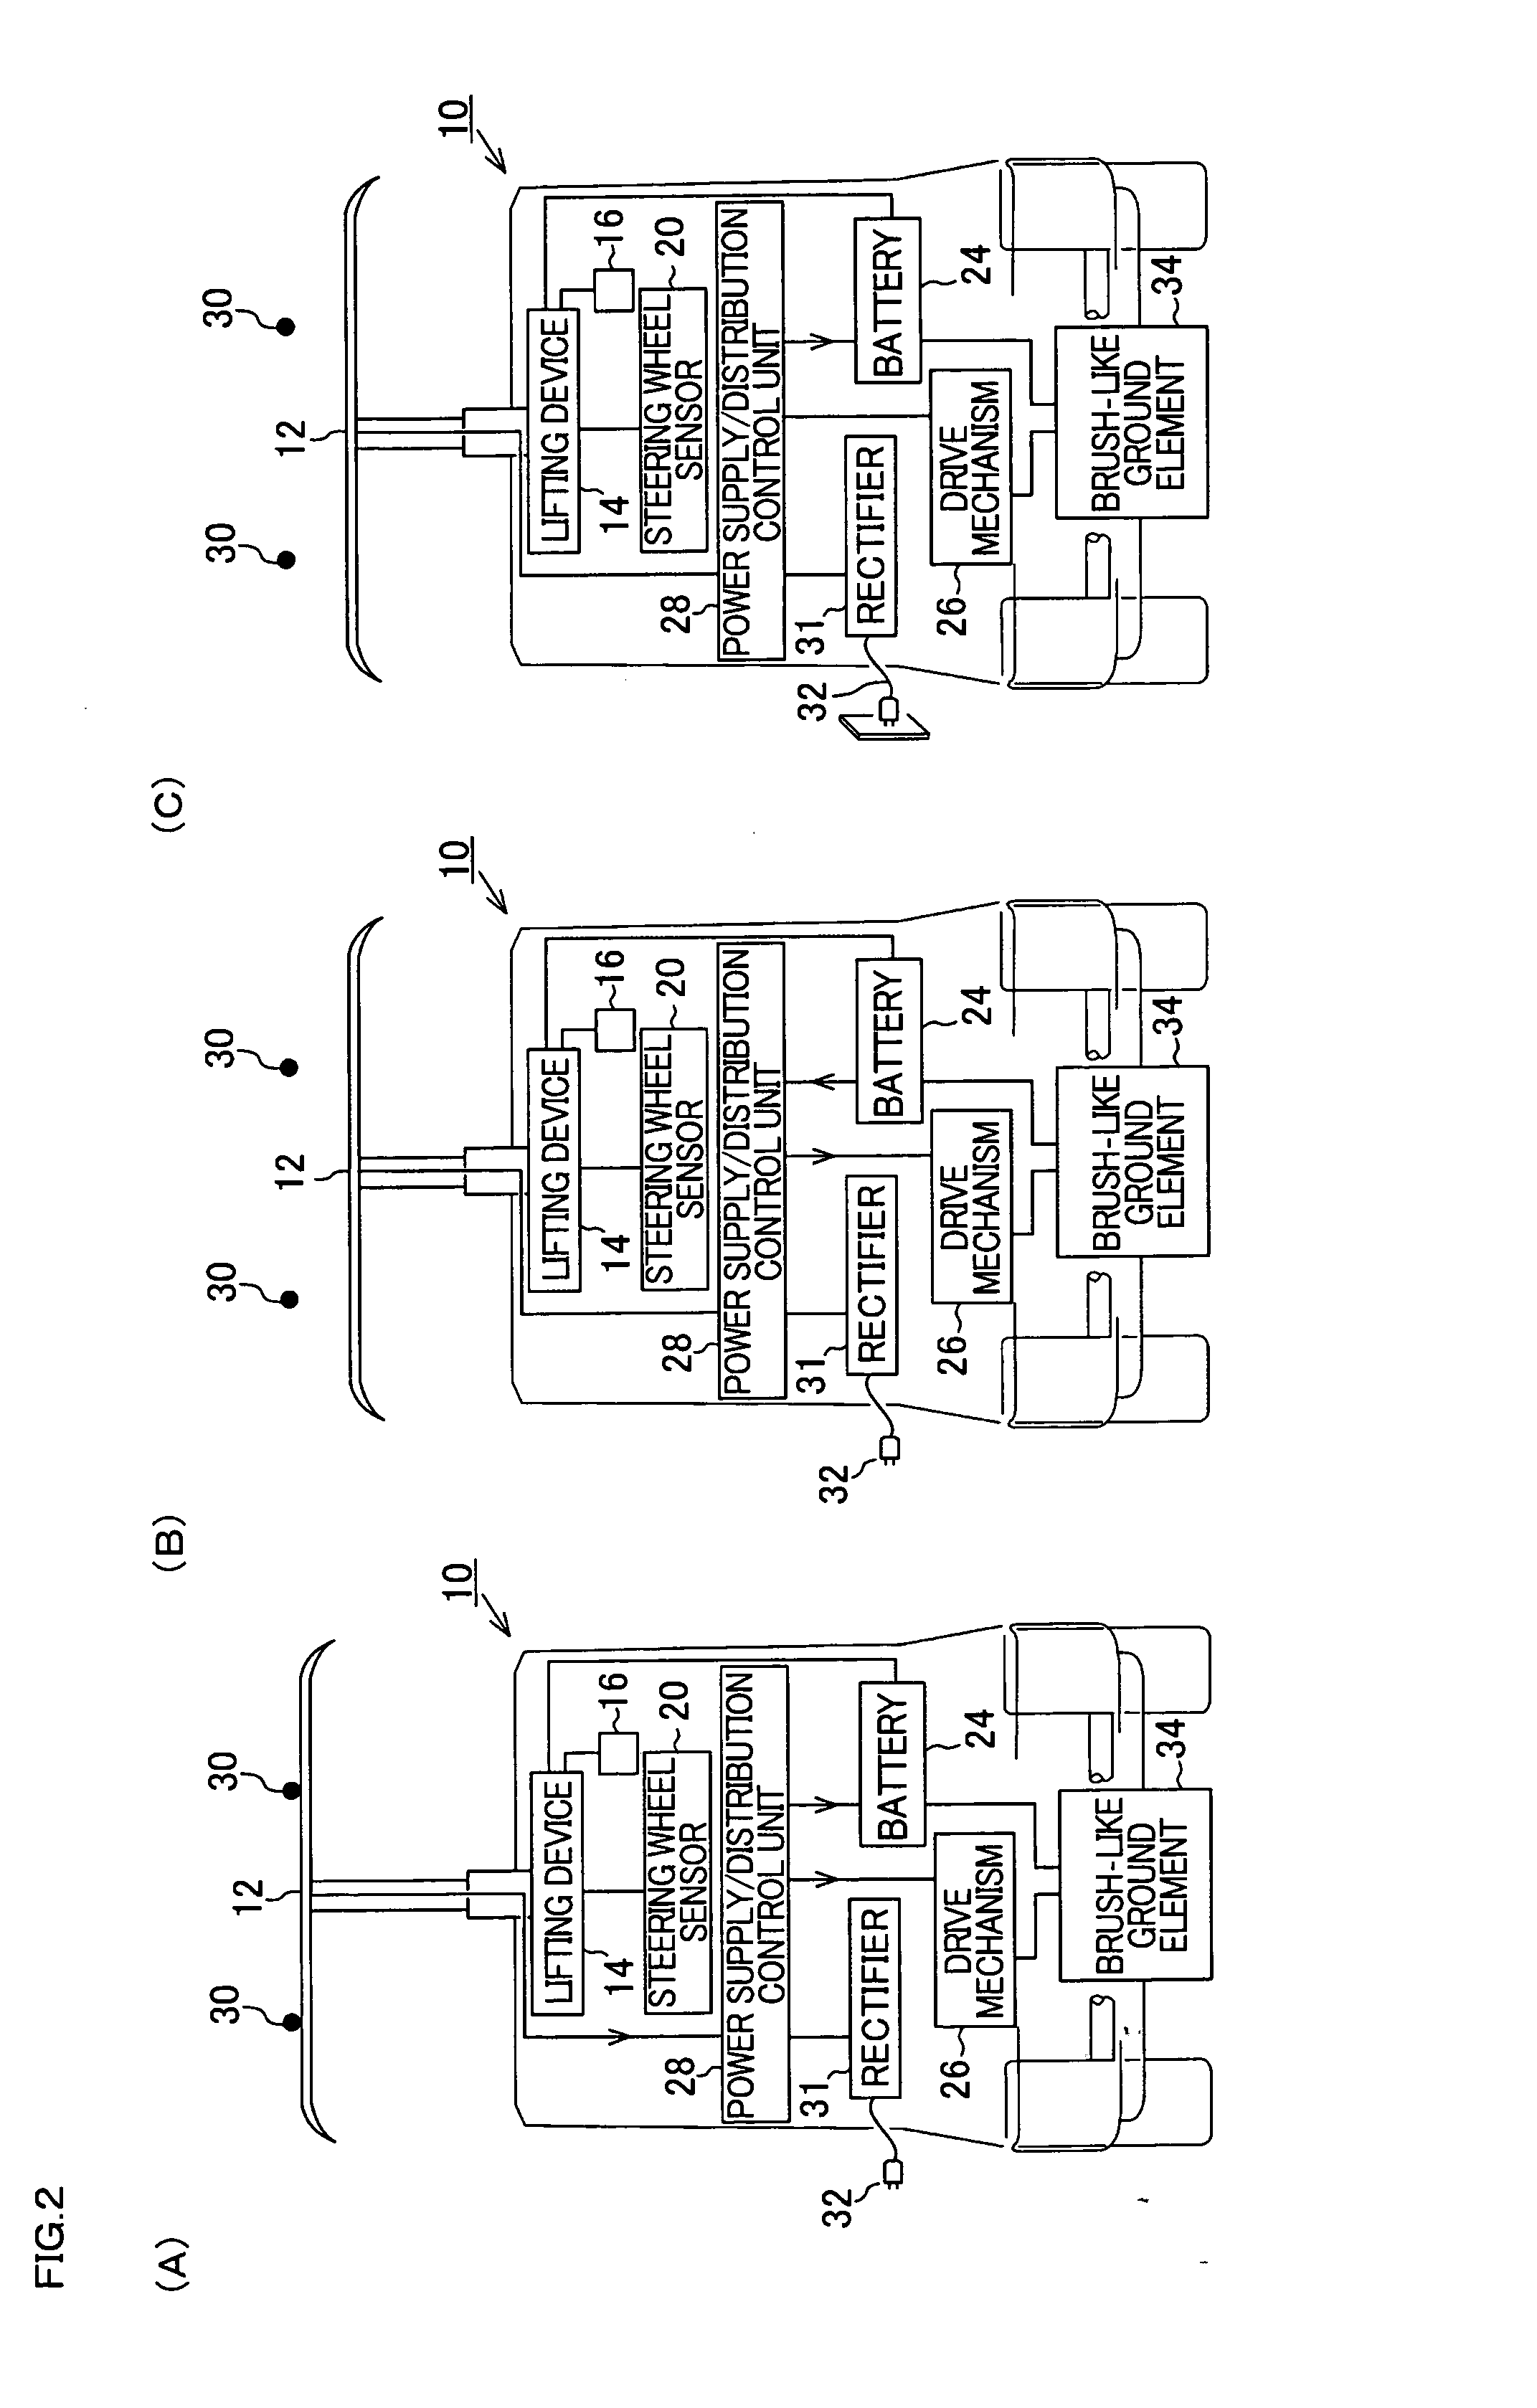 Vehicle and traffic system